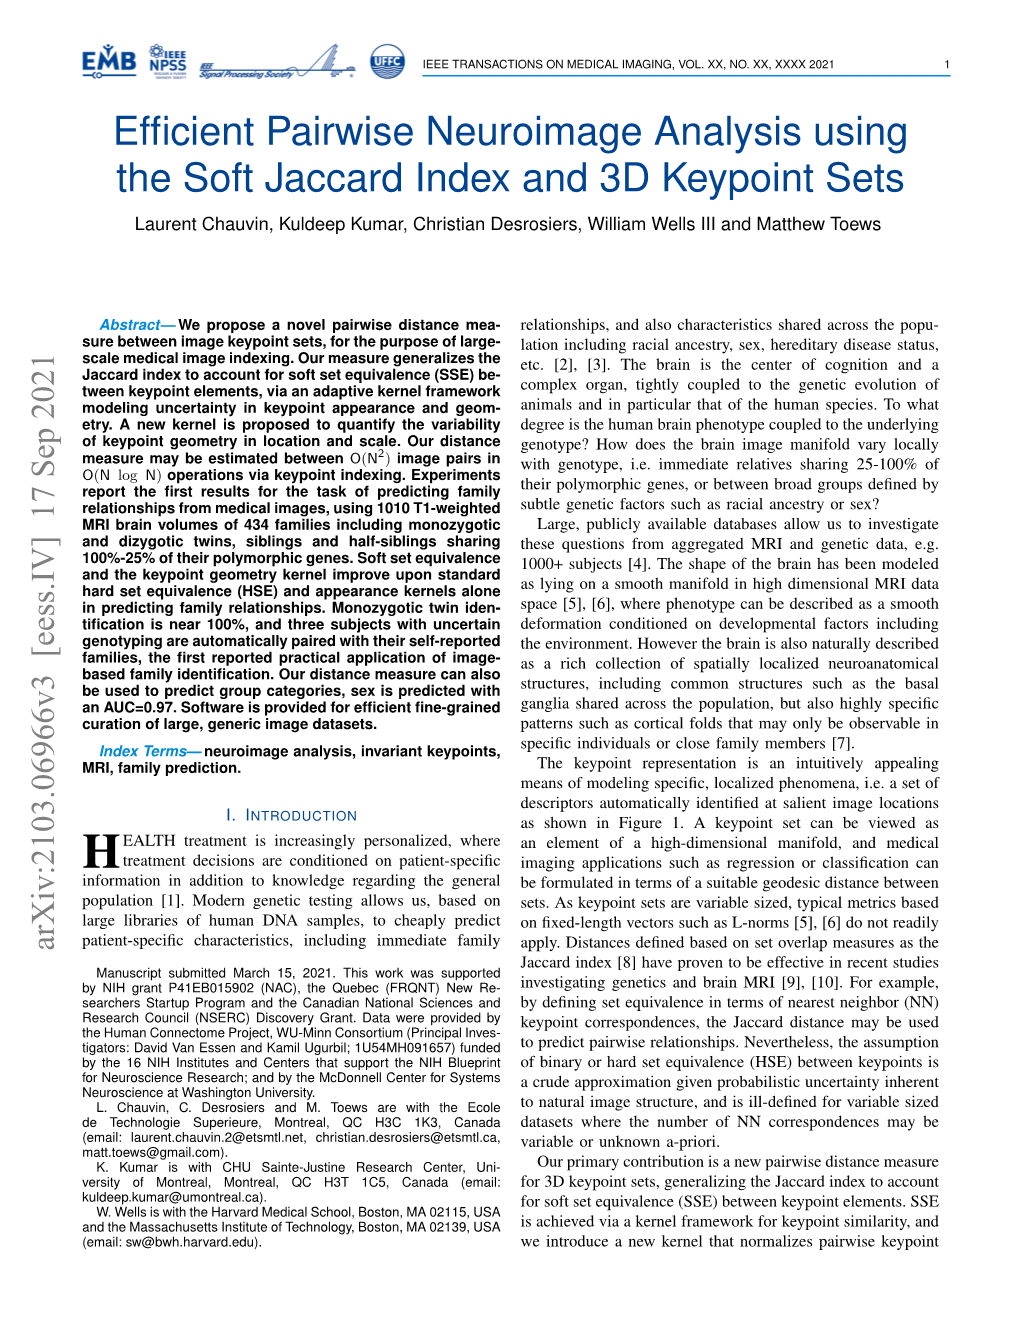 Efficient Pairwise Neuroimage Analysis Using the Soft Jaccard Index and 3D Keypoint Sets 3